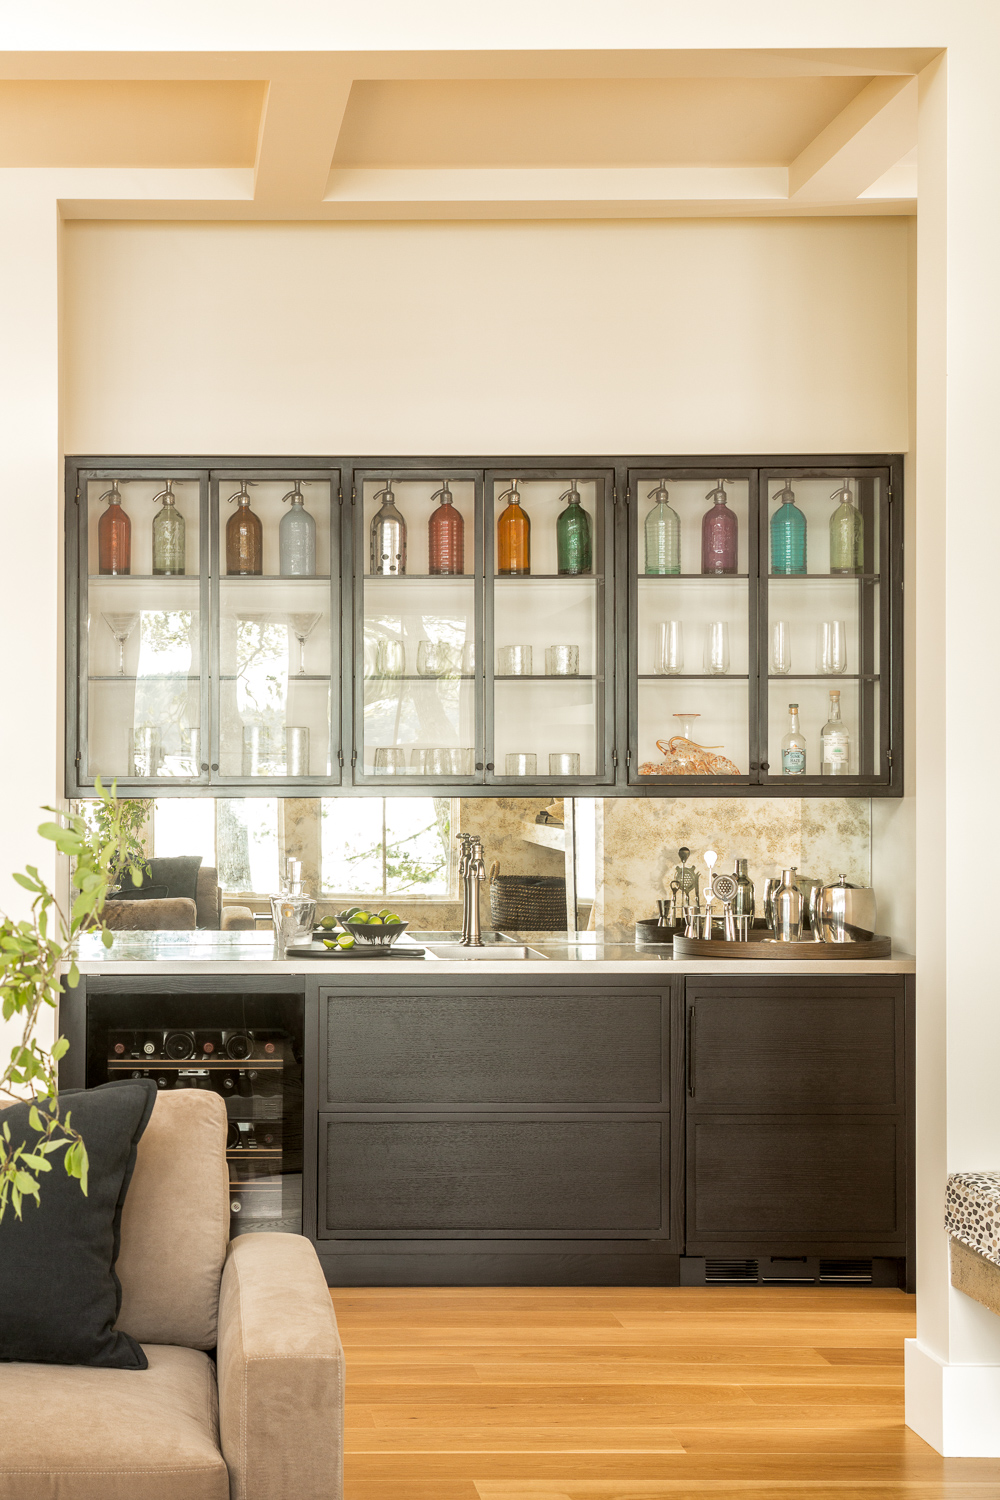 View of bar with overhead glass cabinets